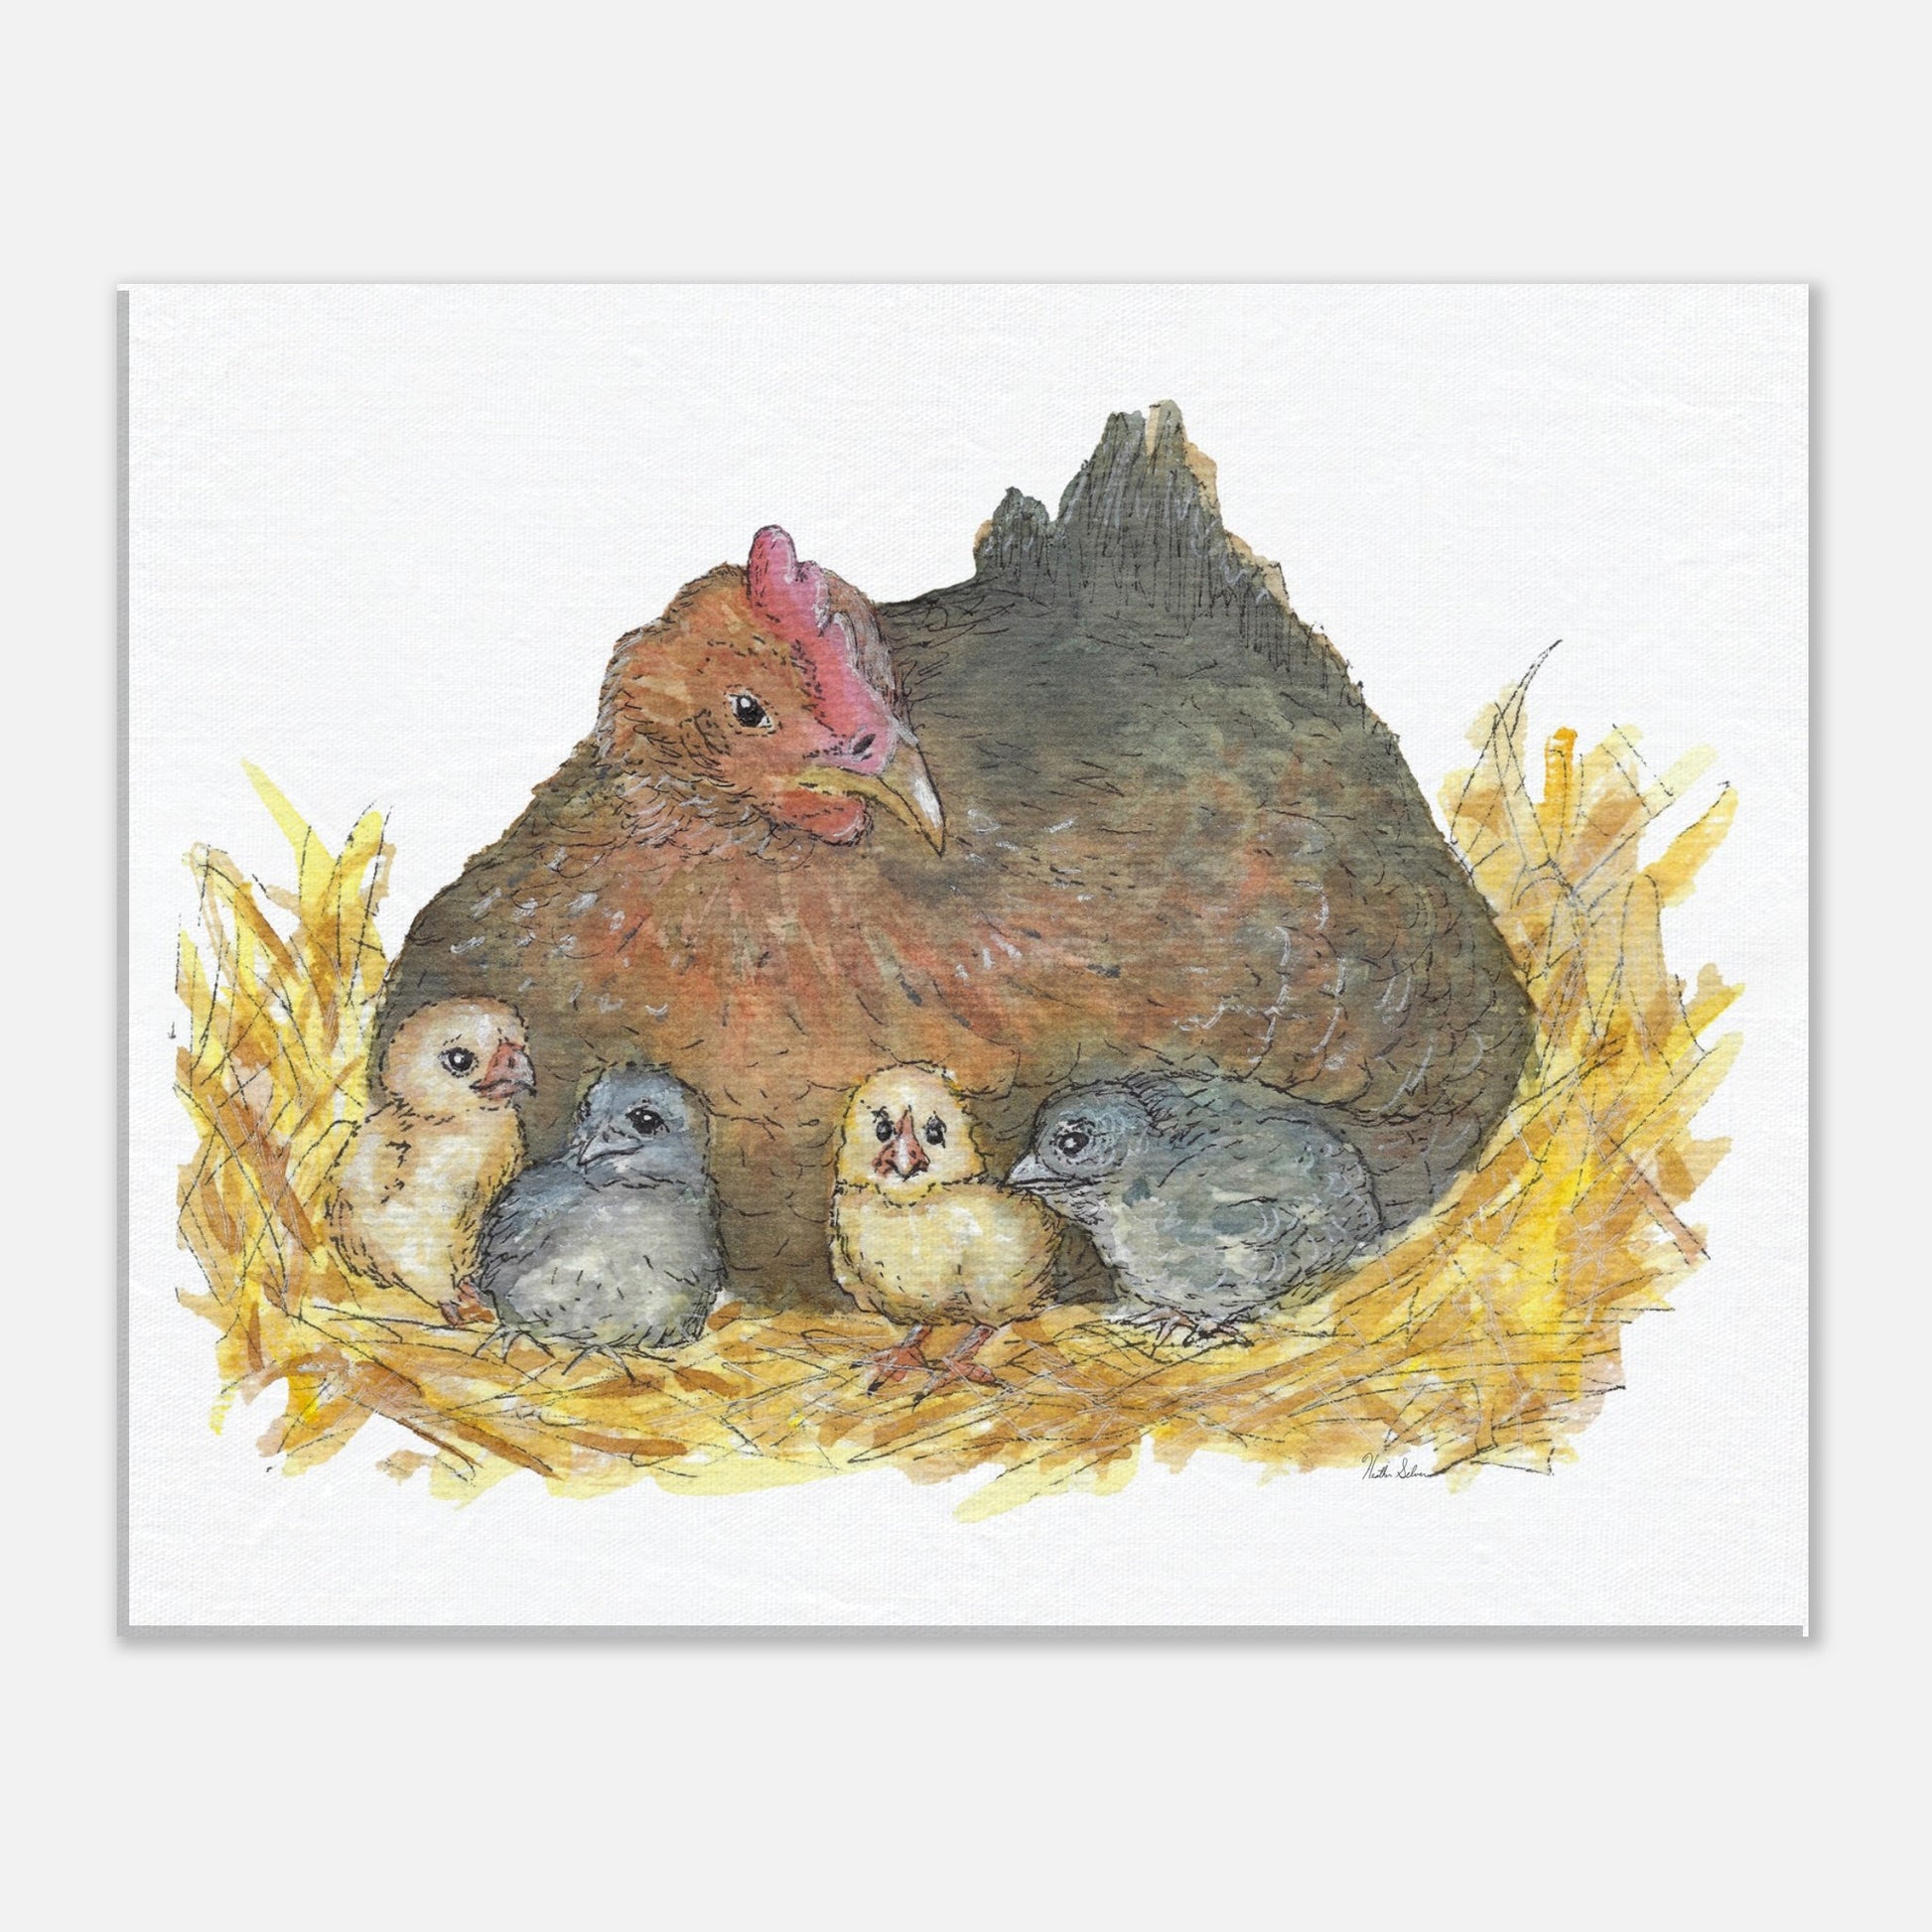 20 by 24 inch slim canvas Mother Hen print. Features a watercolor mother hen and her four chicks in a nest.